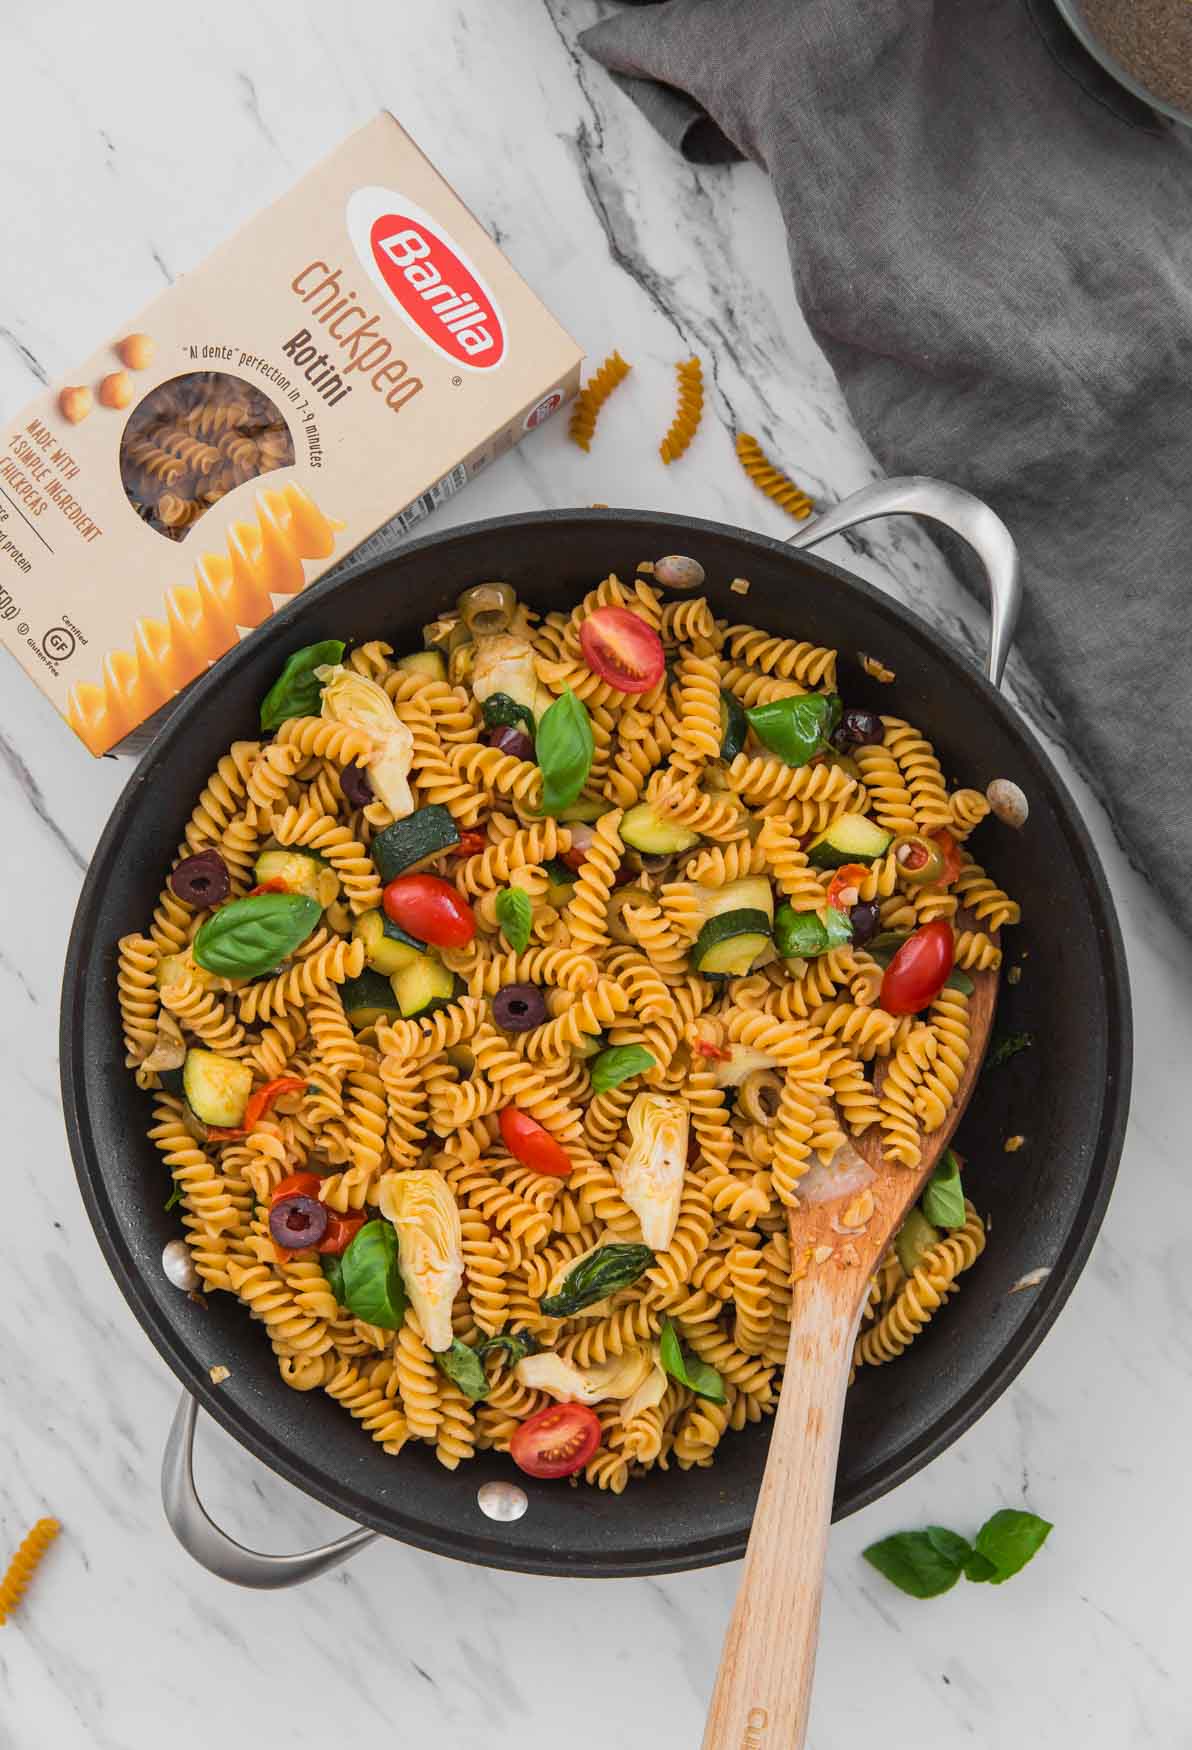 Healthy Mediterranean Pasta with artichoke, olives, and tomato in a large skillet